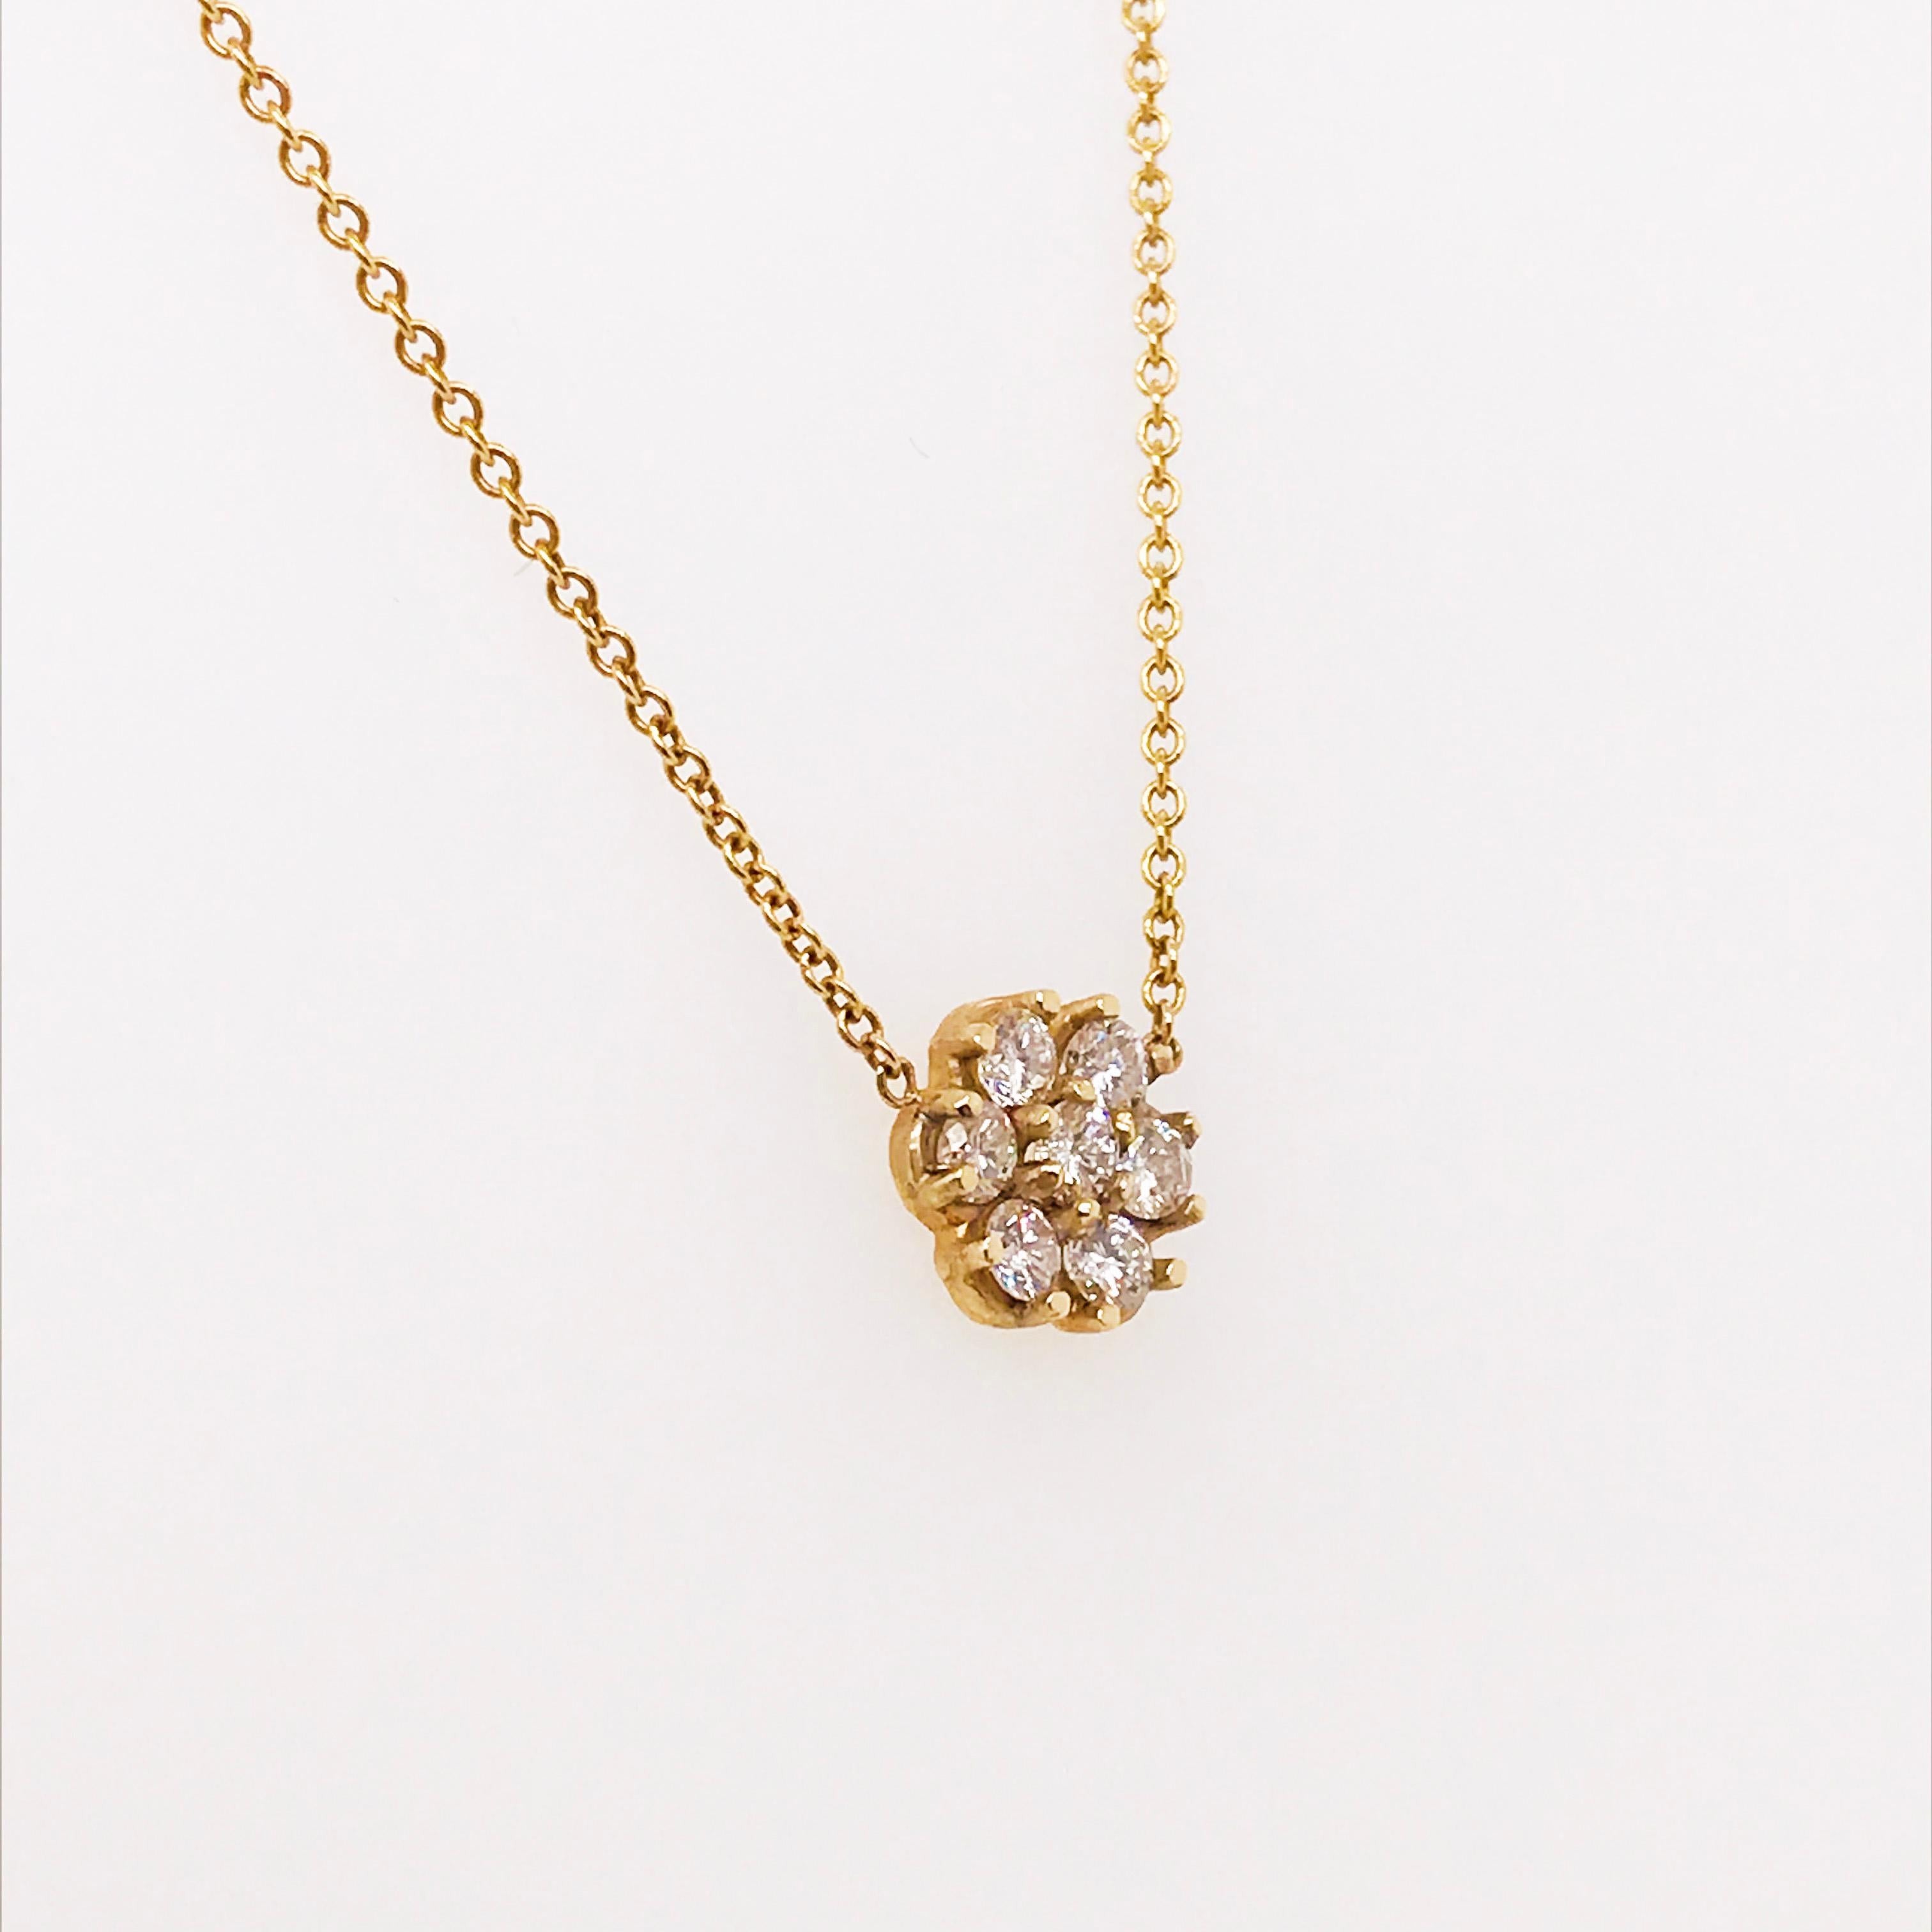 Floral Diamond Cluster Necklace with 7 round brilliant diamonds each set in prong settings. This beautiful diamond flower cluster is soldered in place on an 18 inch, strong but dainty chain. The diamond cluster soldered in place helps prevent the